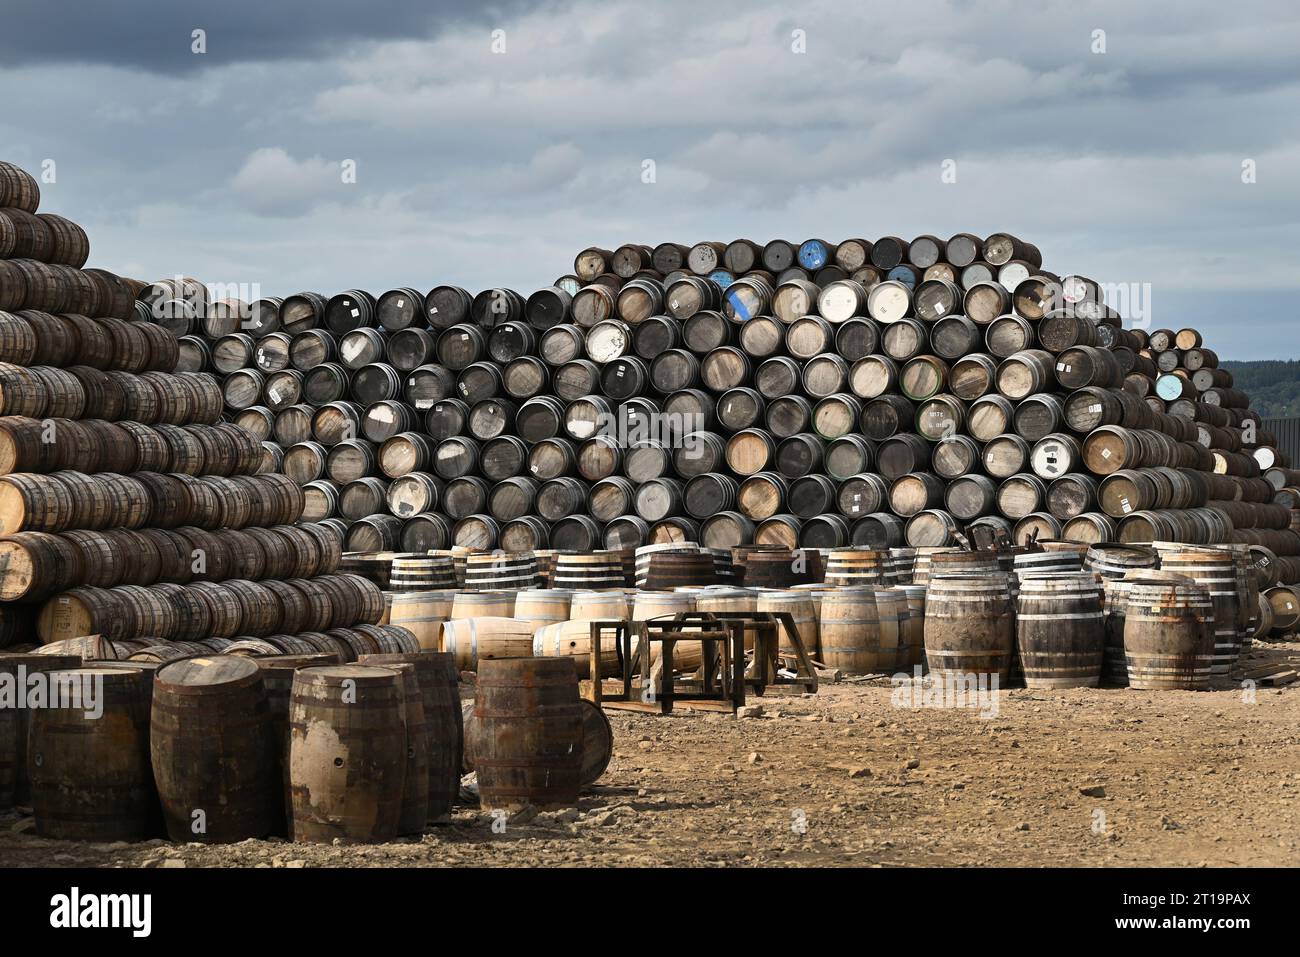 The Speyside Cooparage in Craigellachie, Scotland, produces, barrels to store the whisky after the distillery process is completed. Stock Photo